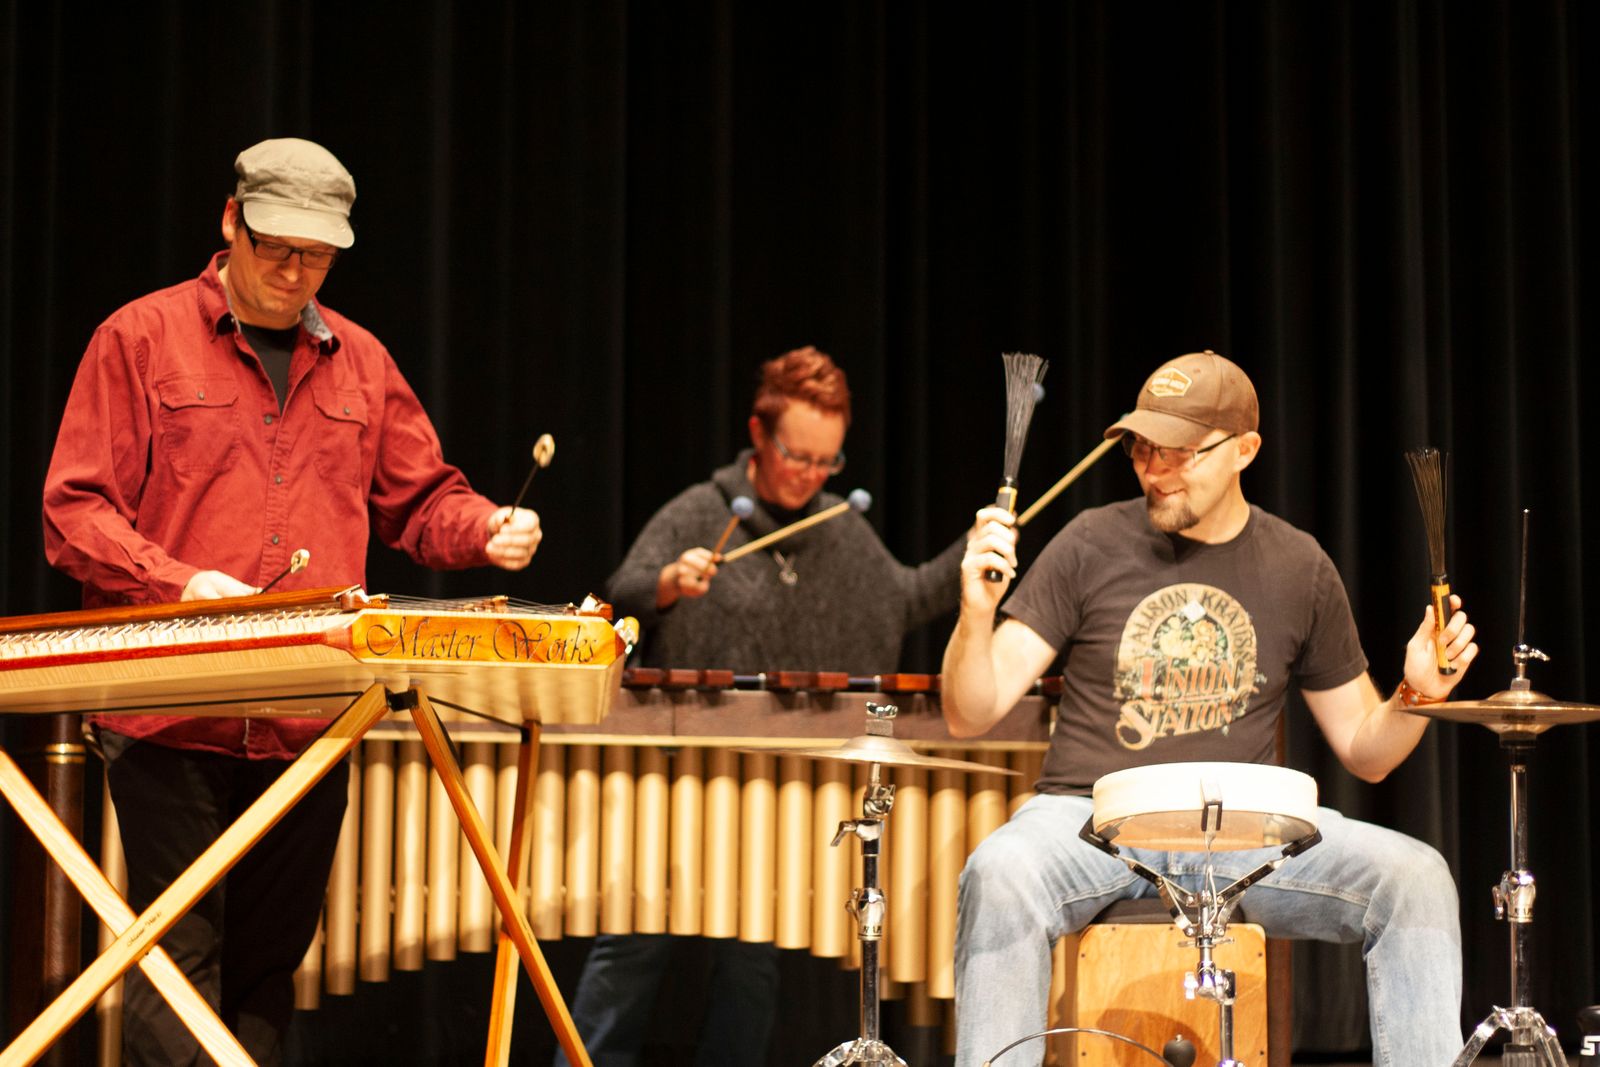 Wayne Center For The Arts : Visit : Performing Arts Series: Ted Yoder & Rhythmwood Drive